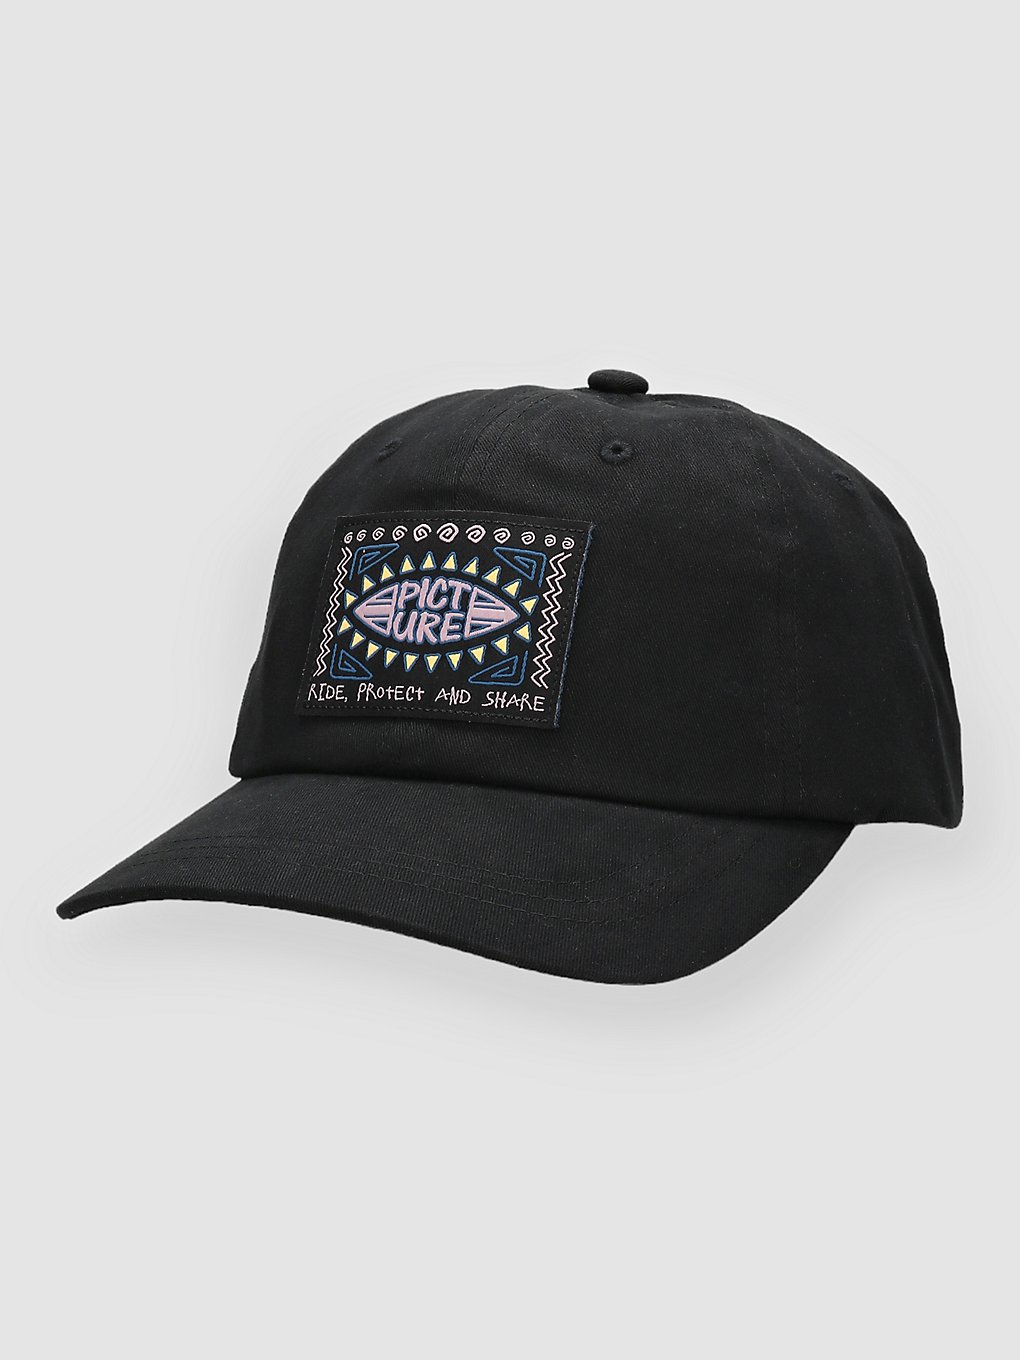 Picture Hagay Cap a black washed kaufen